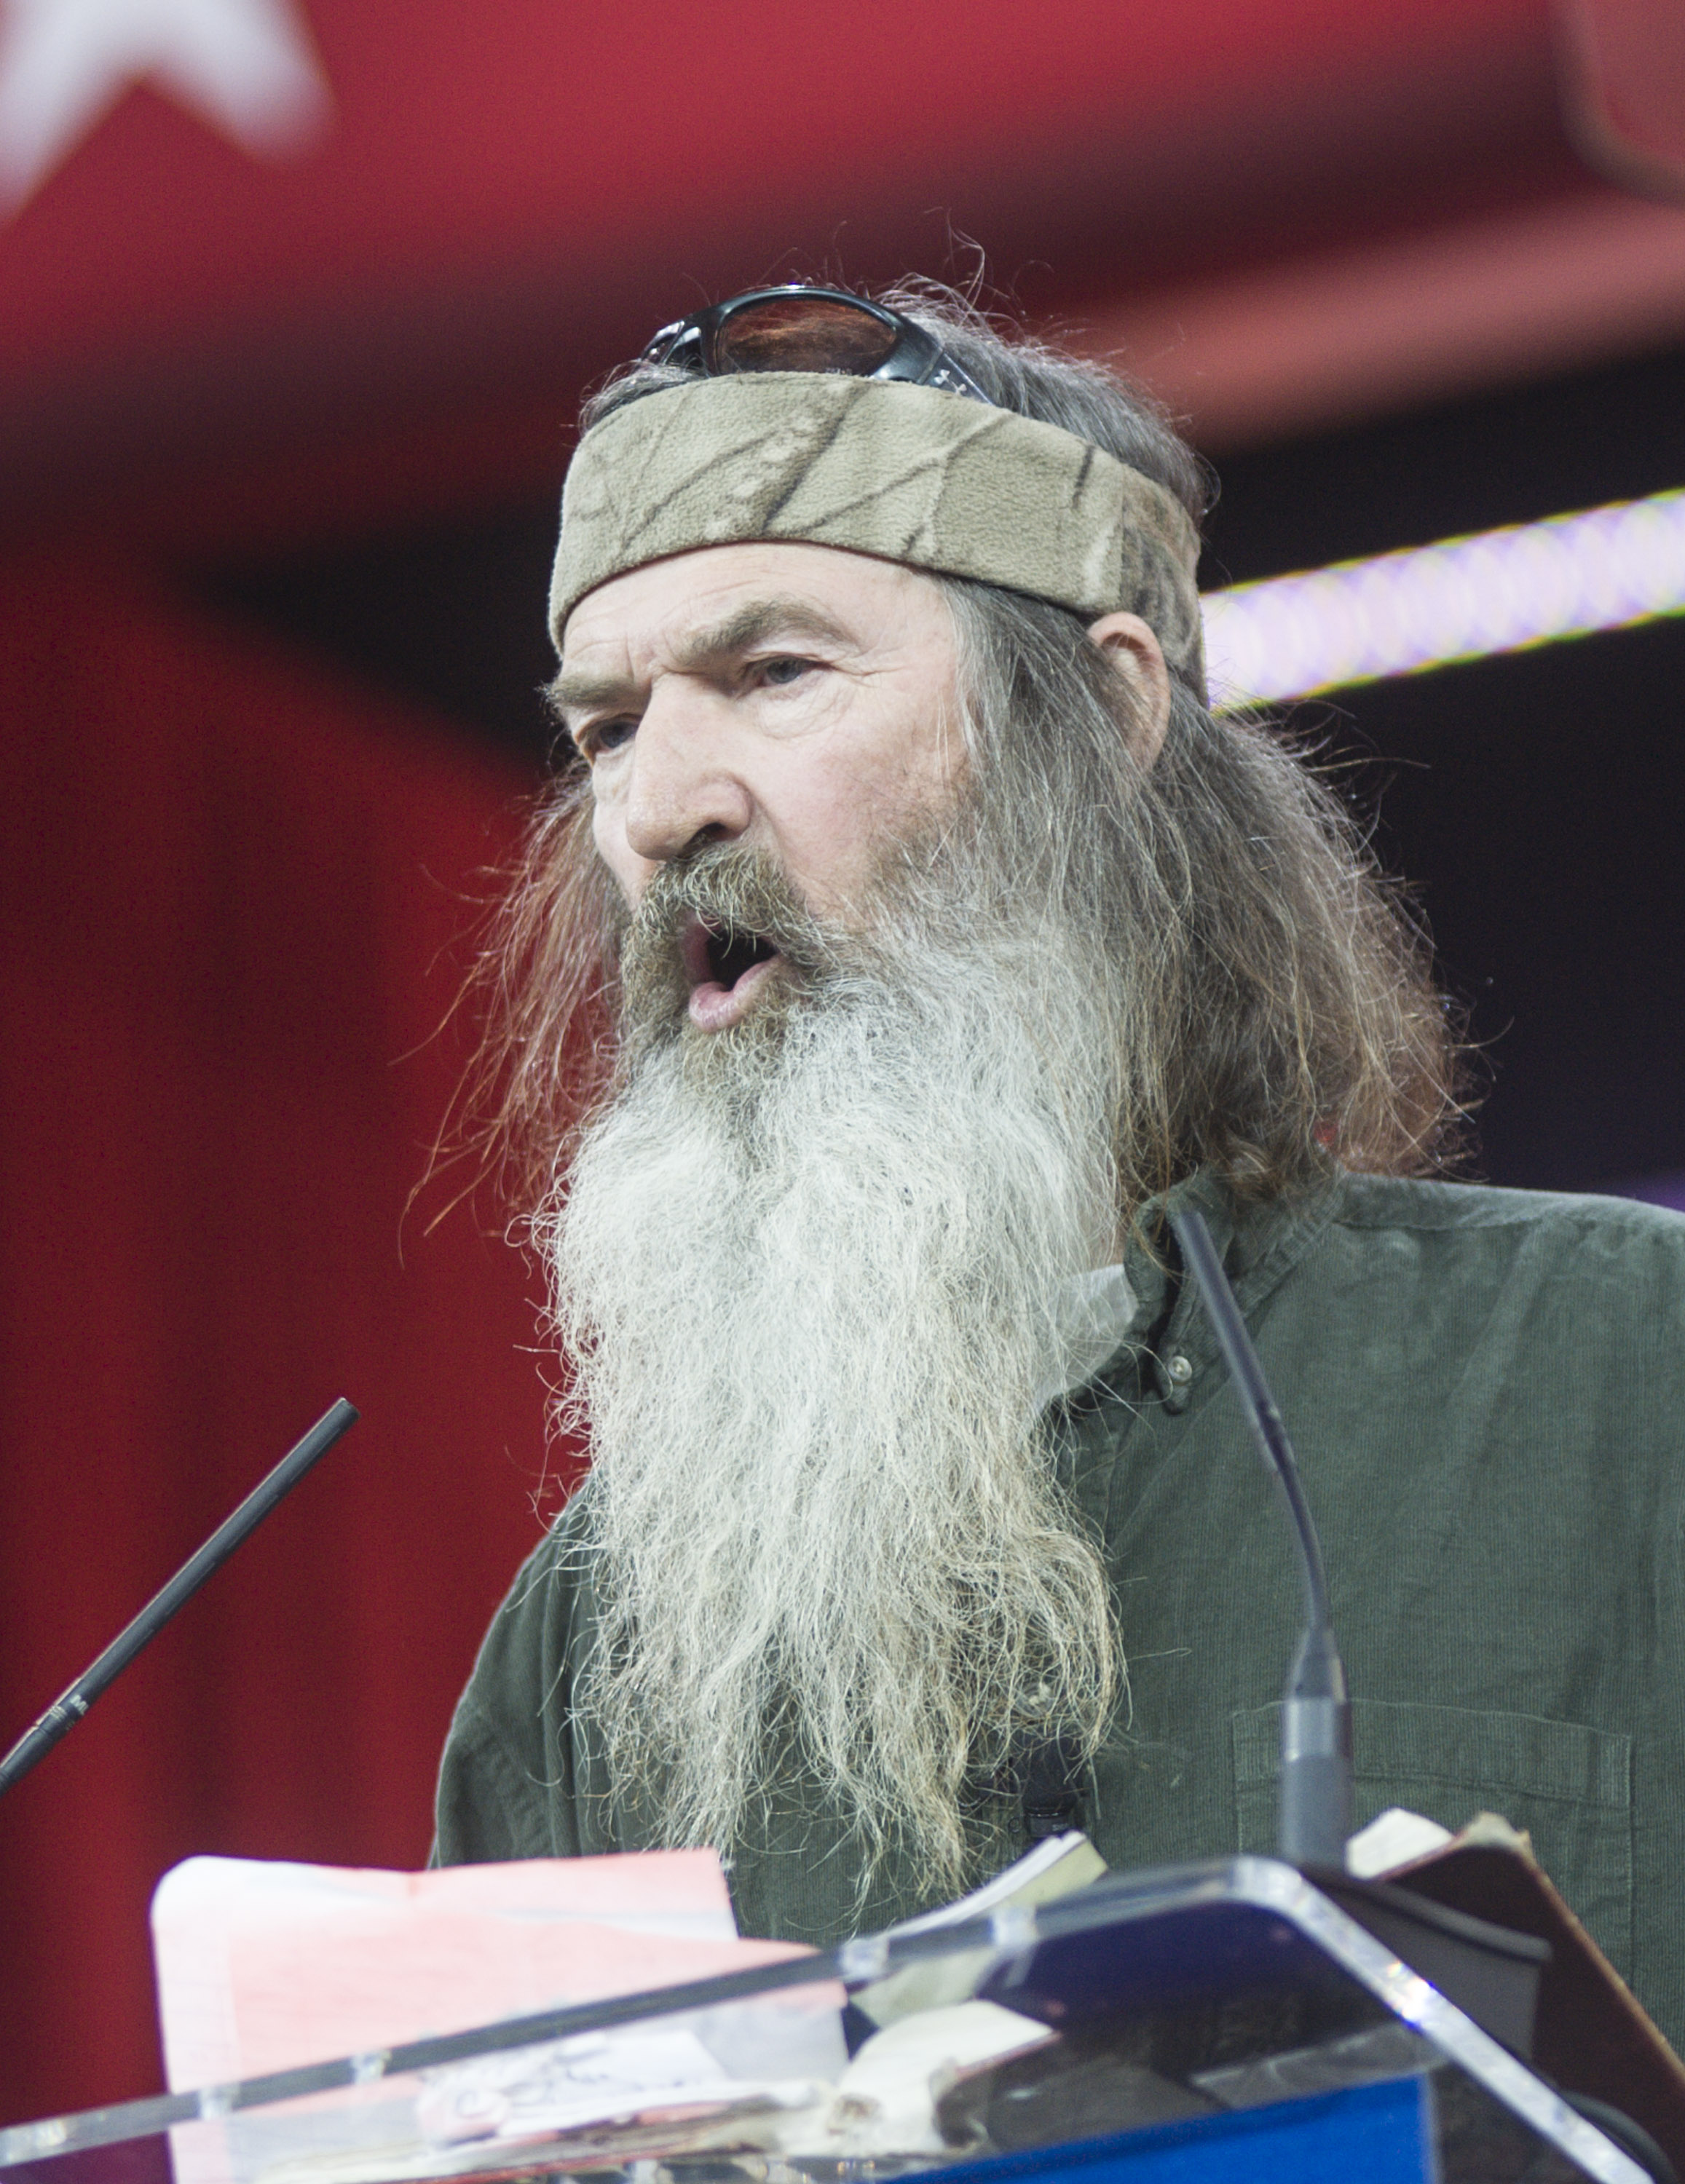 Phil Robertson of A&amp;E's Duck Dynasty addresses the 42nd annual Conservative Political Action Conference (CPAC) at the Gaylord National Resort Hotel and Convention Center on February 27, 2015 in National Harbor, Maryland. (Kris Connor&mdash;Getty Images)